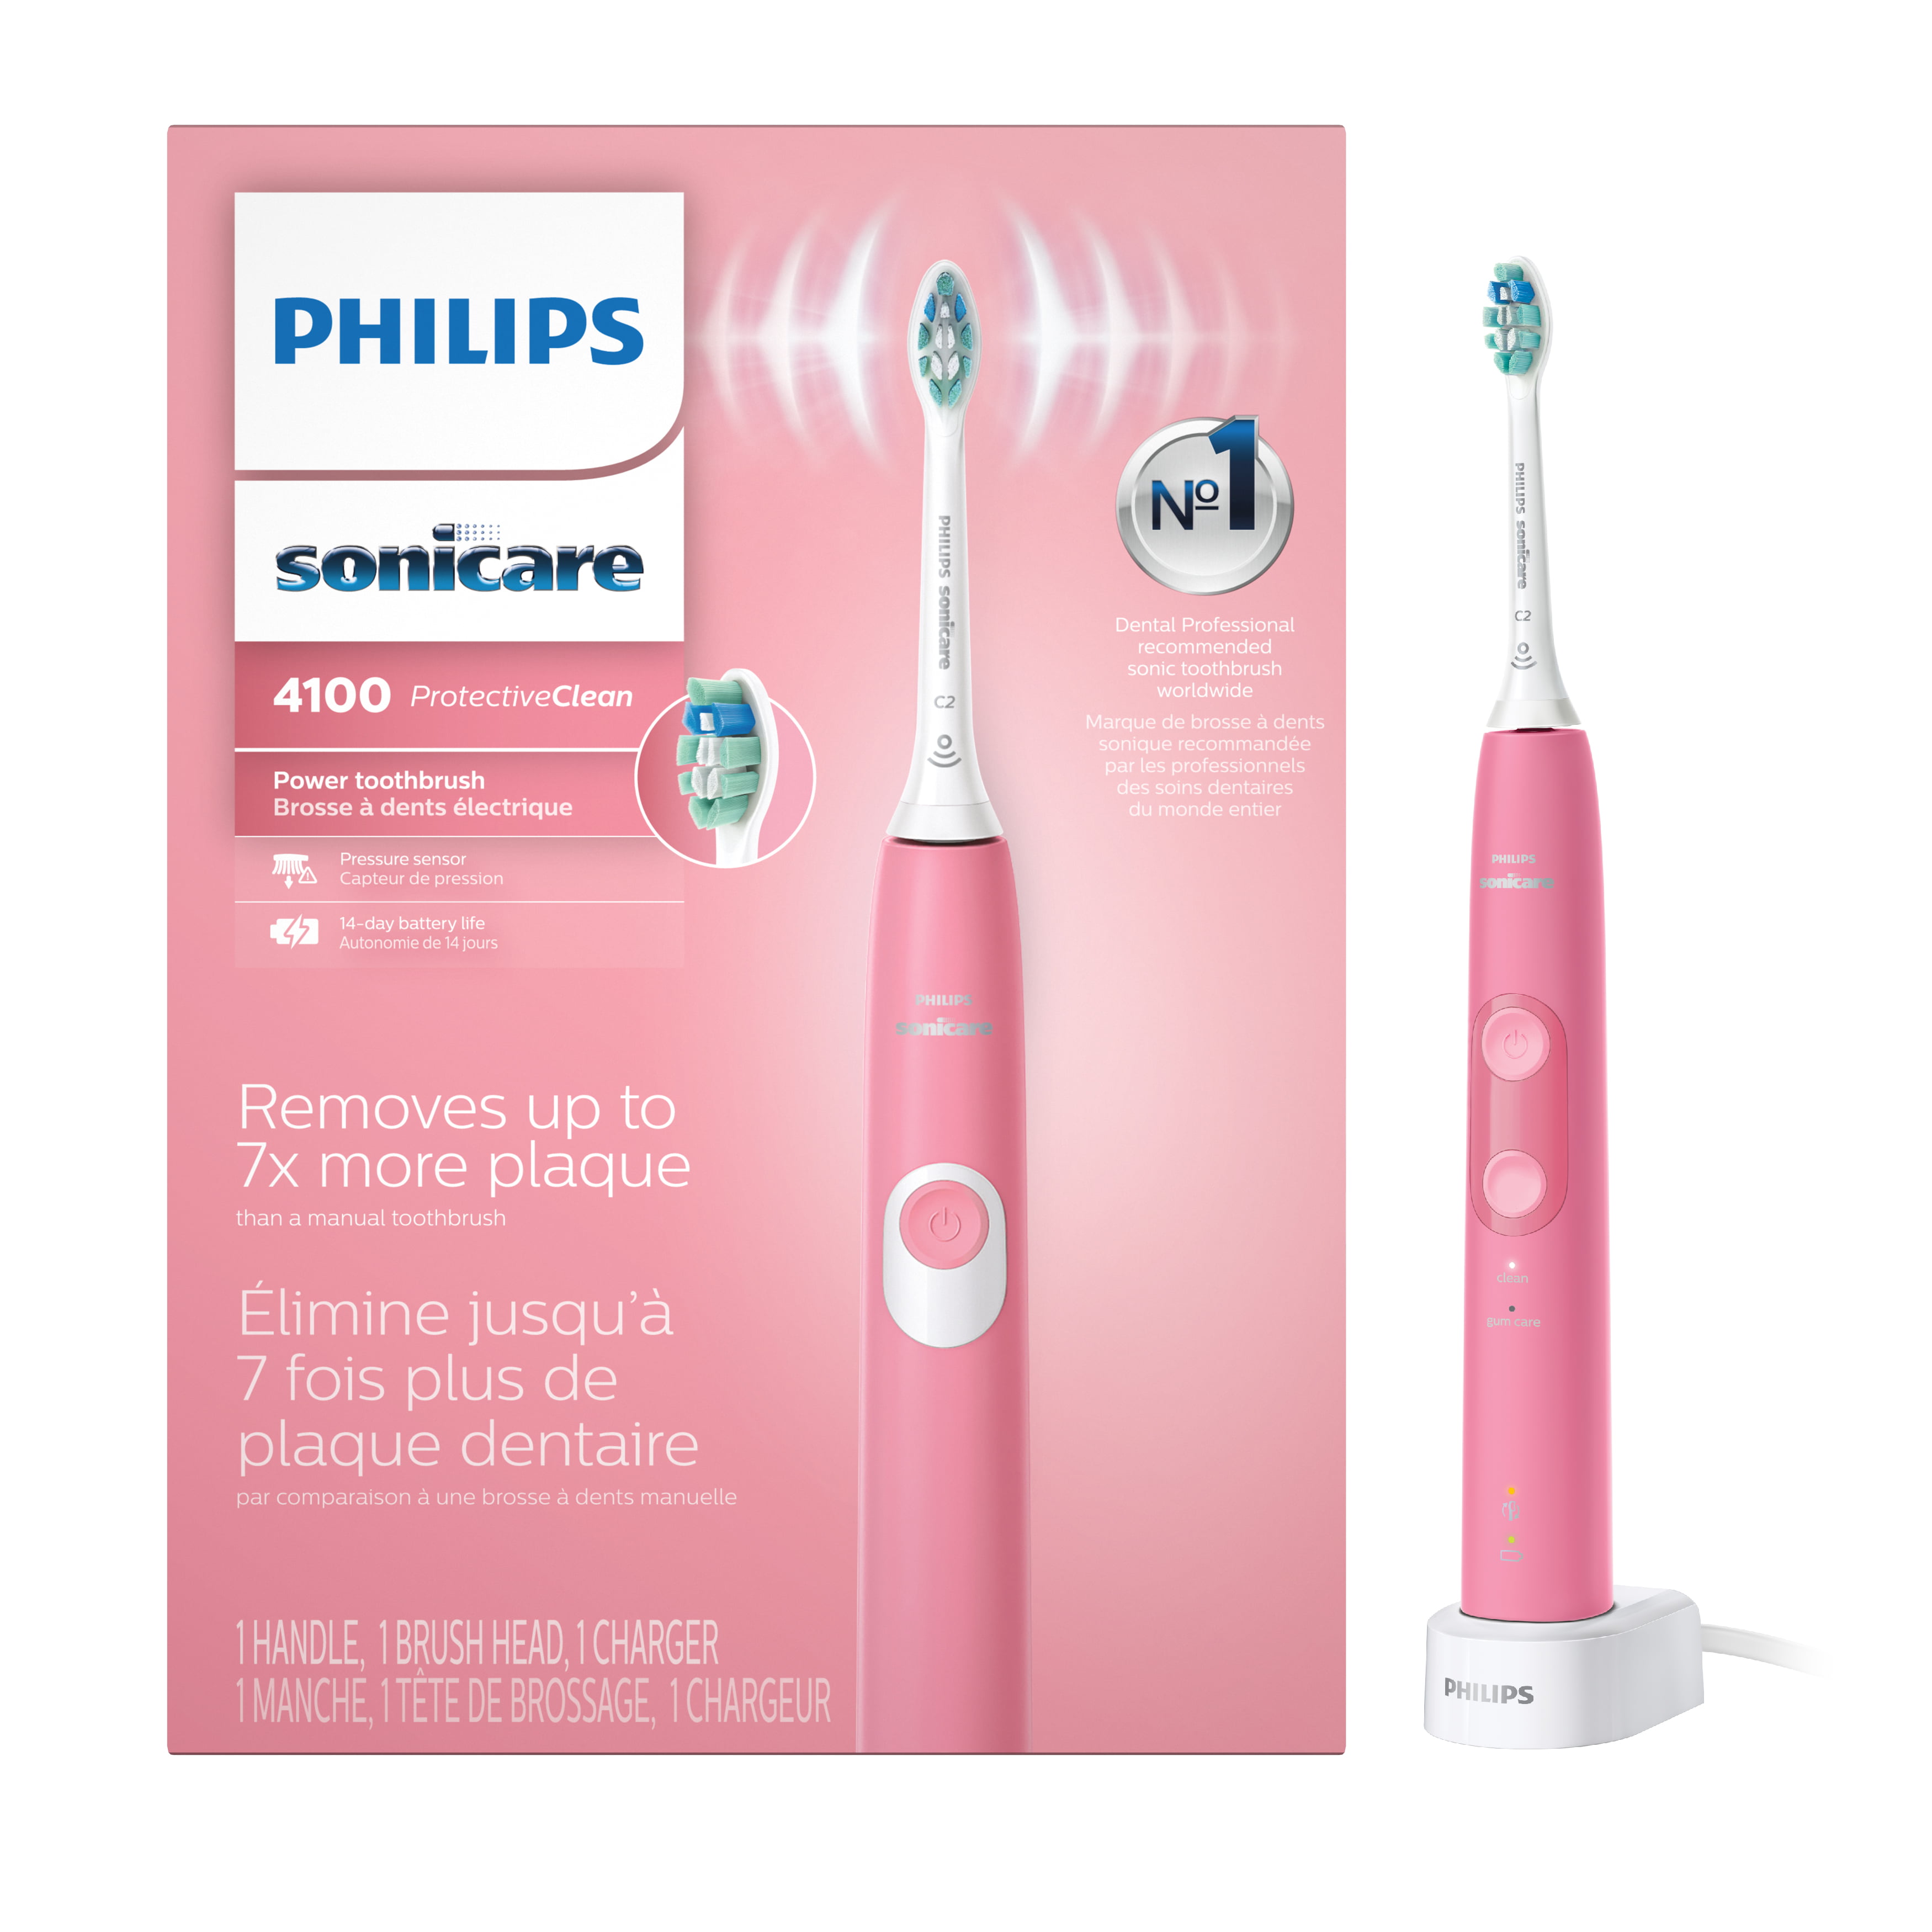 Philips Sonicare ProtectiveClean 4100 Rechargeable